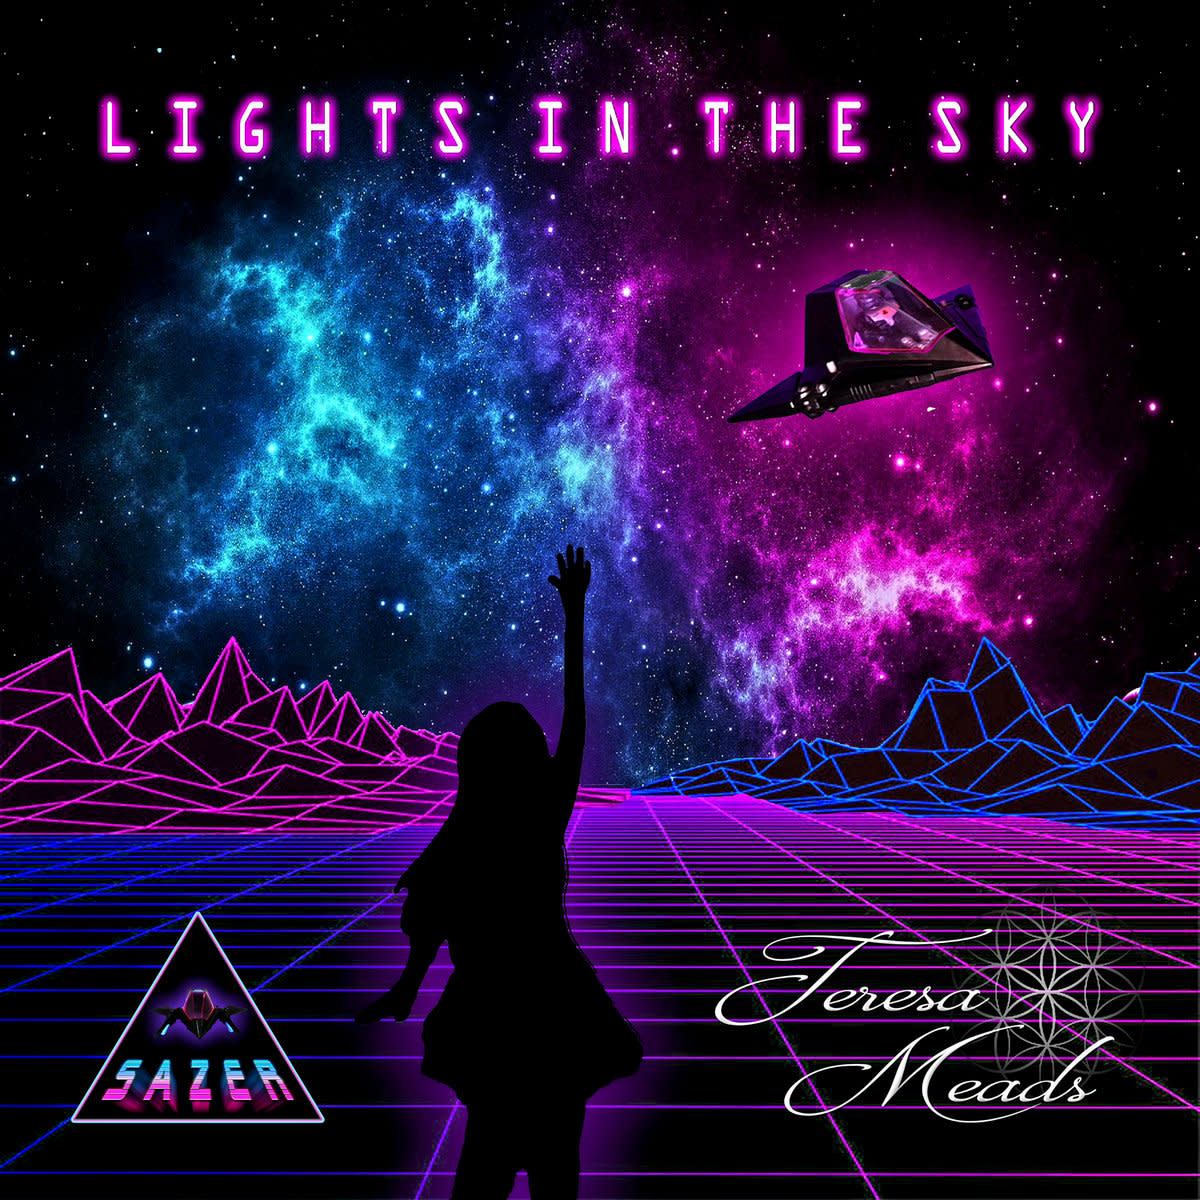 synth-single-review-lights-in-the-sky-by-s-a-z-e-r